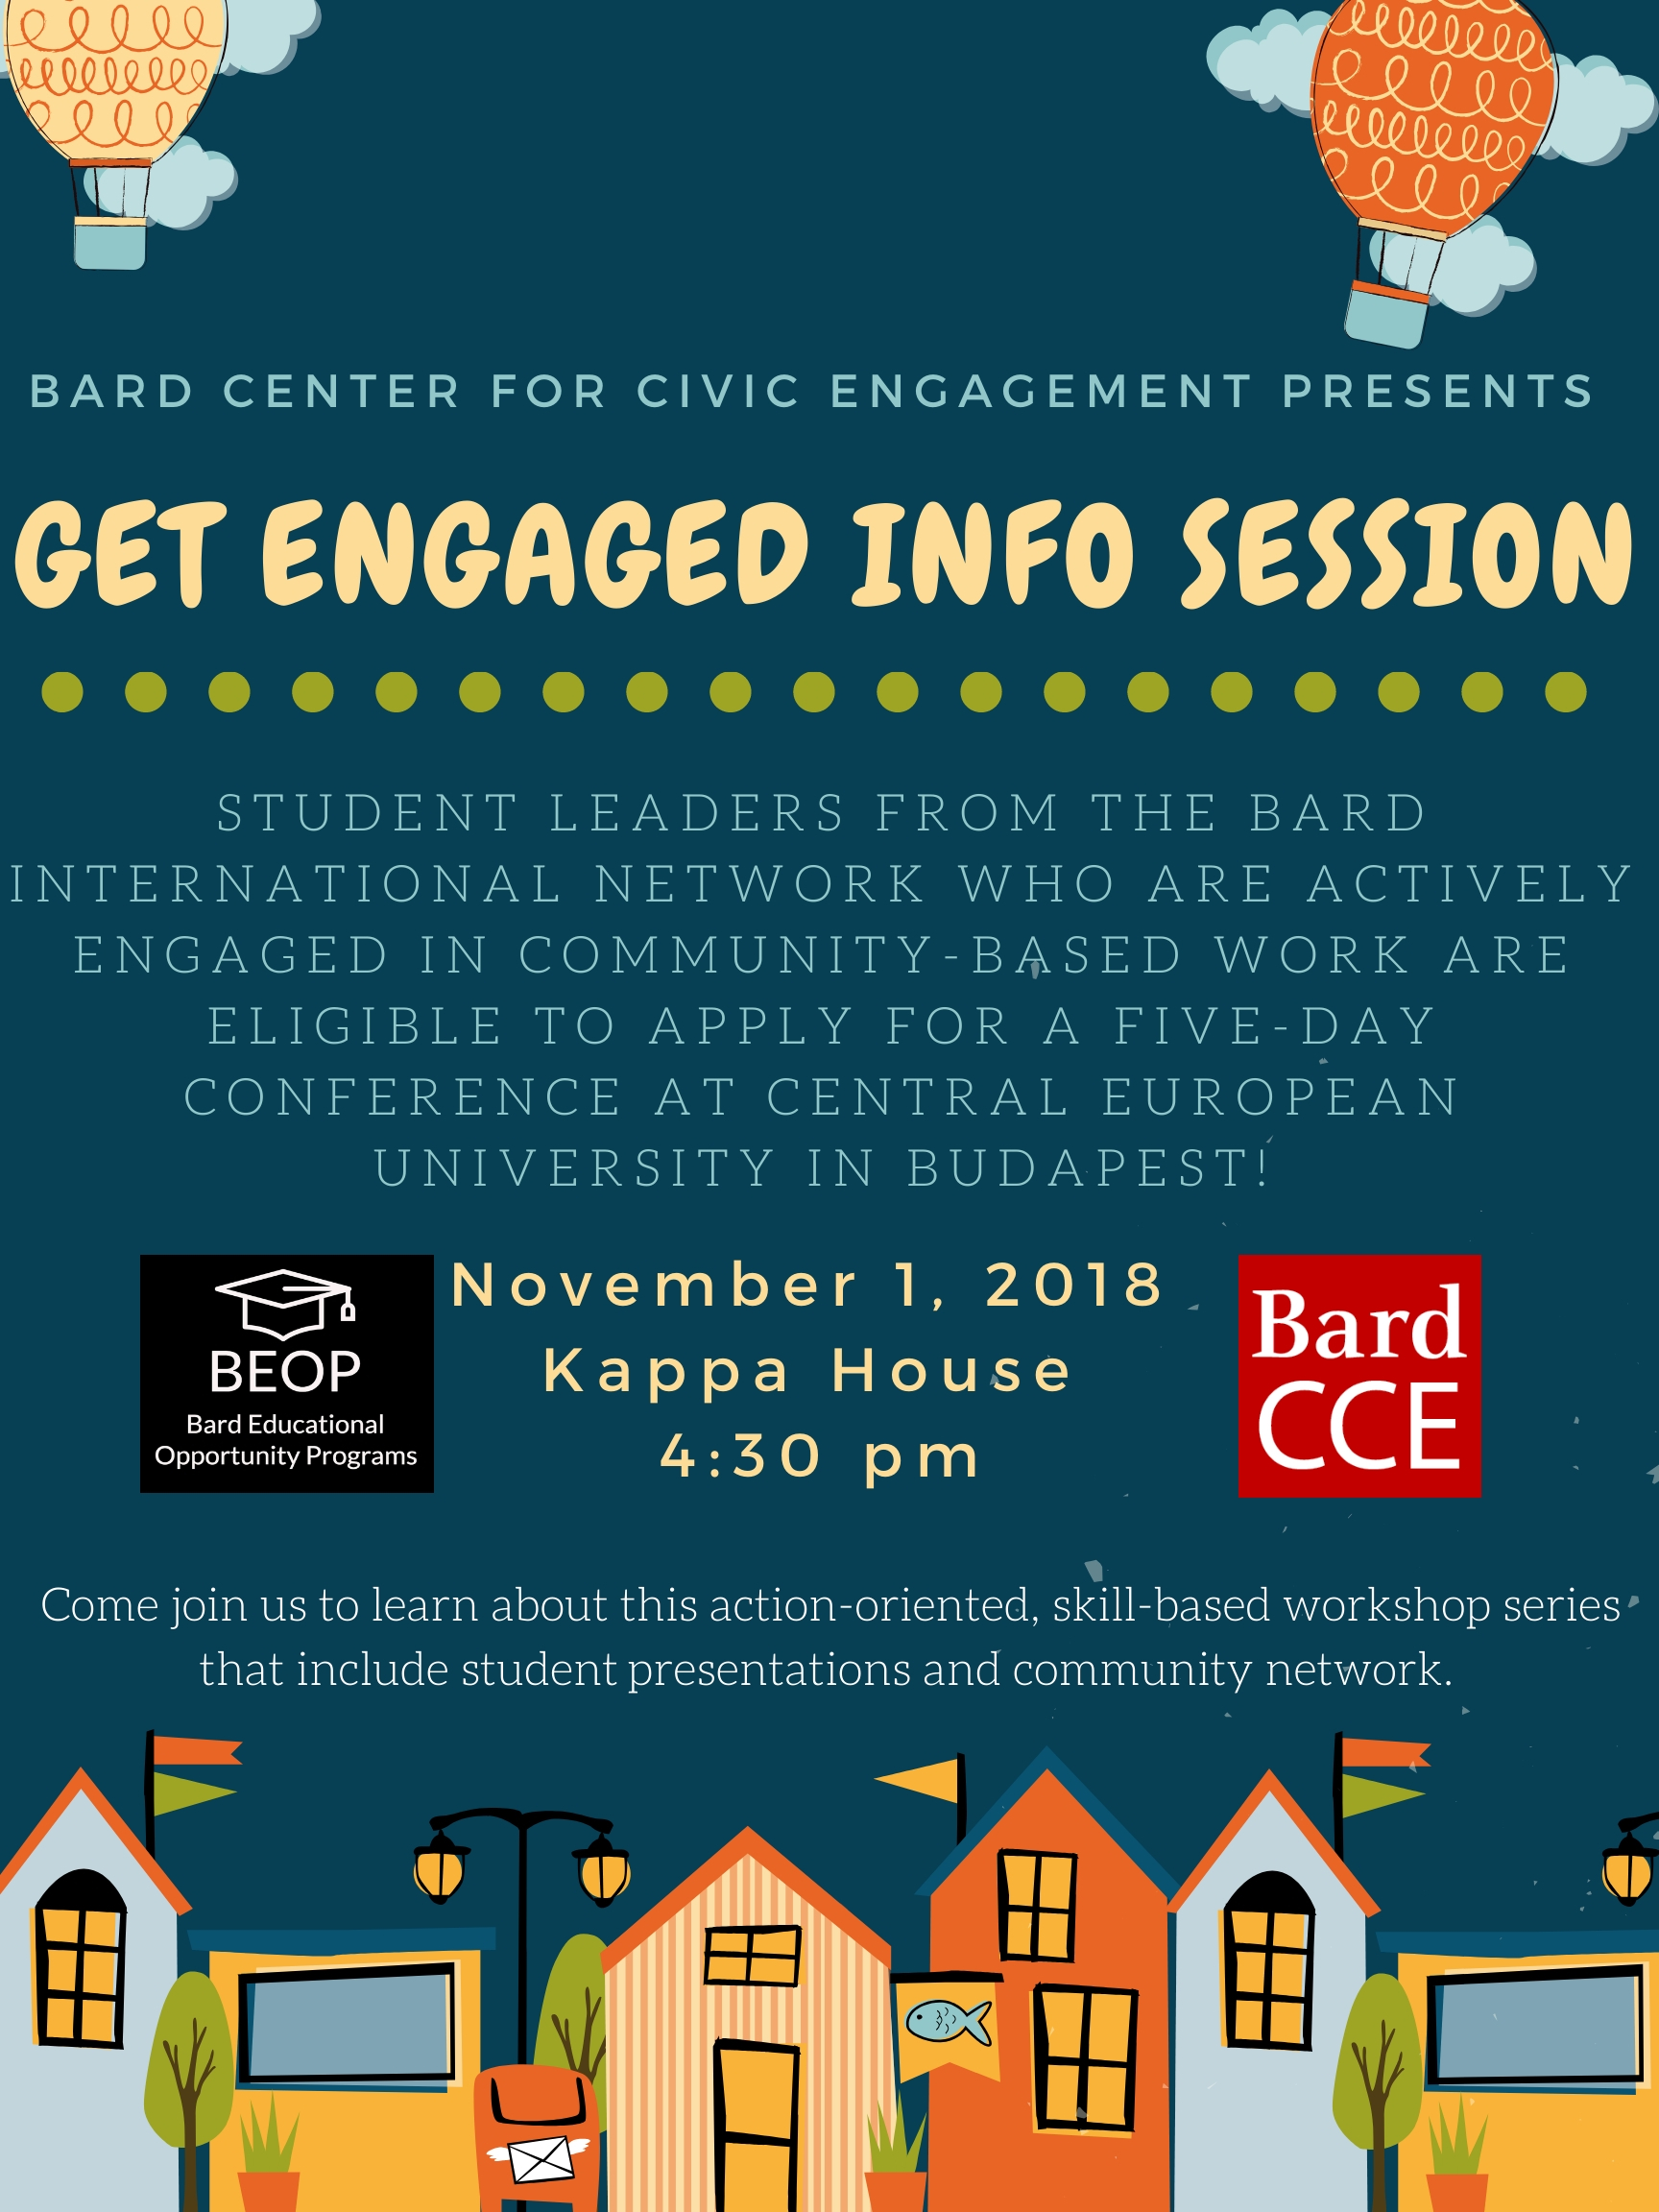 Get Engaged Conference Information Session